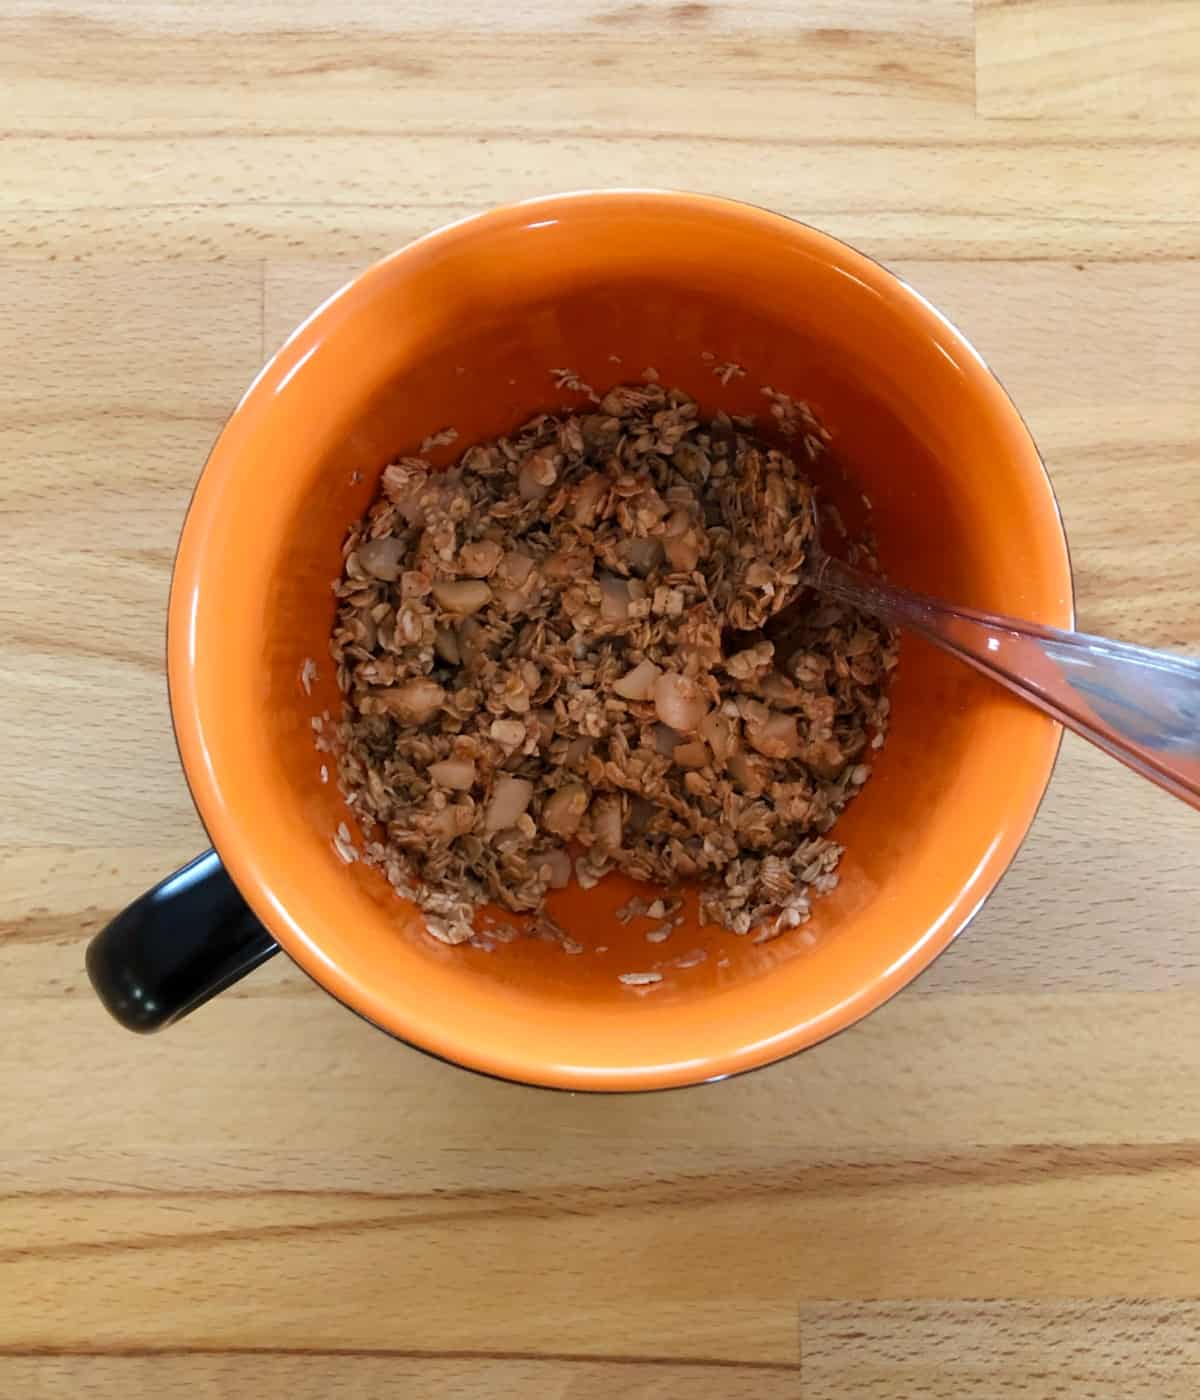 Mixing uncooked oats, maple syrup and coconut oil in orange mug with spoon.